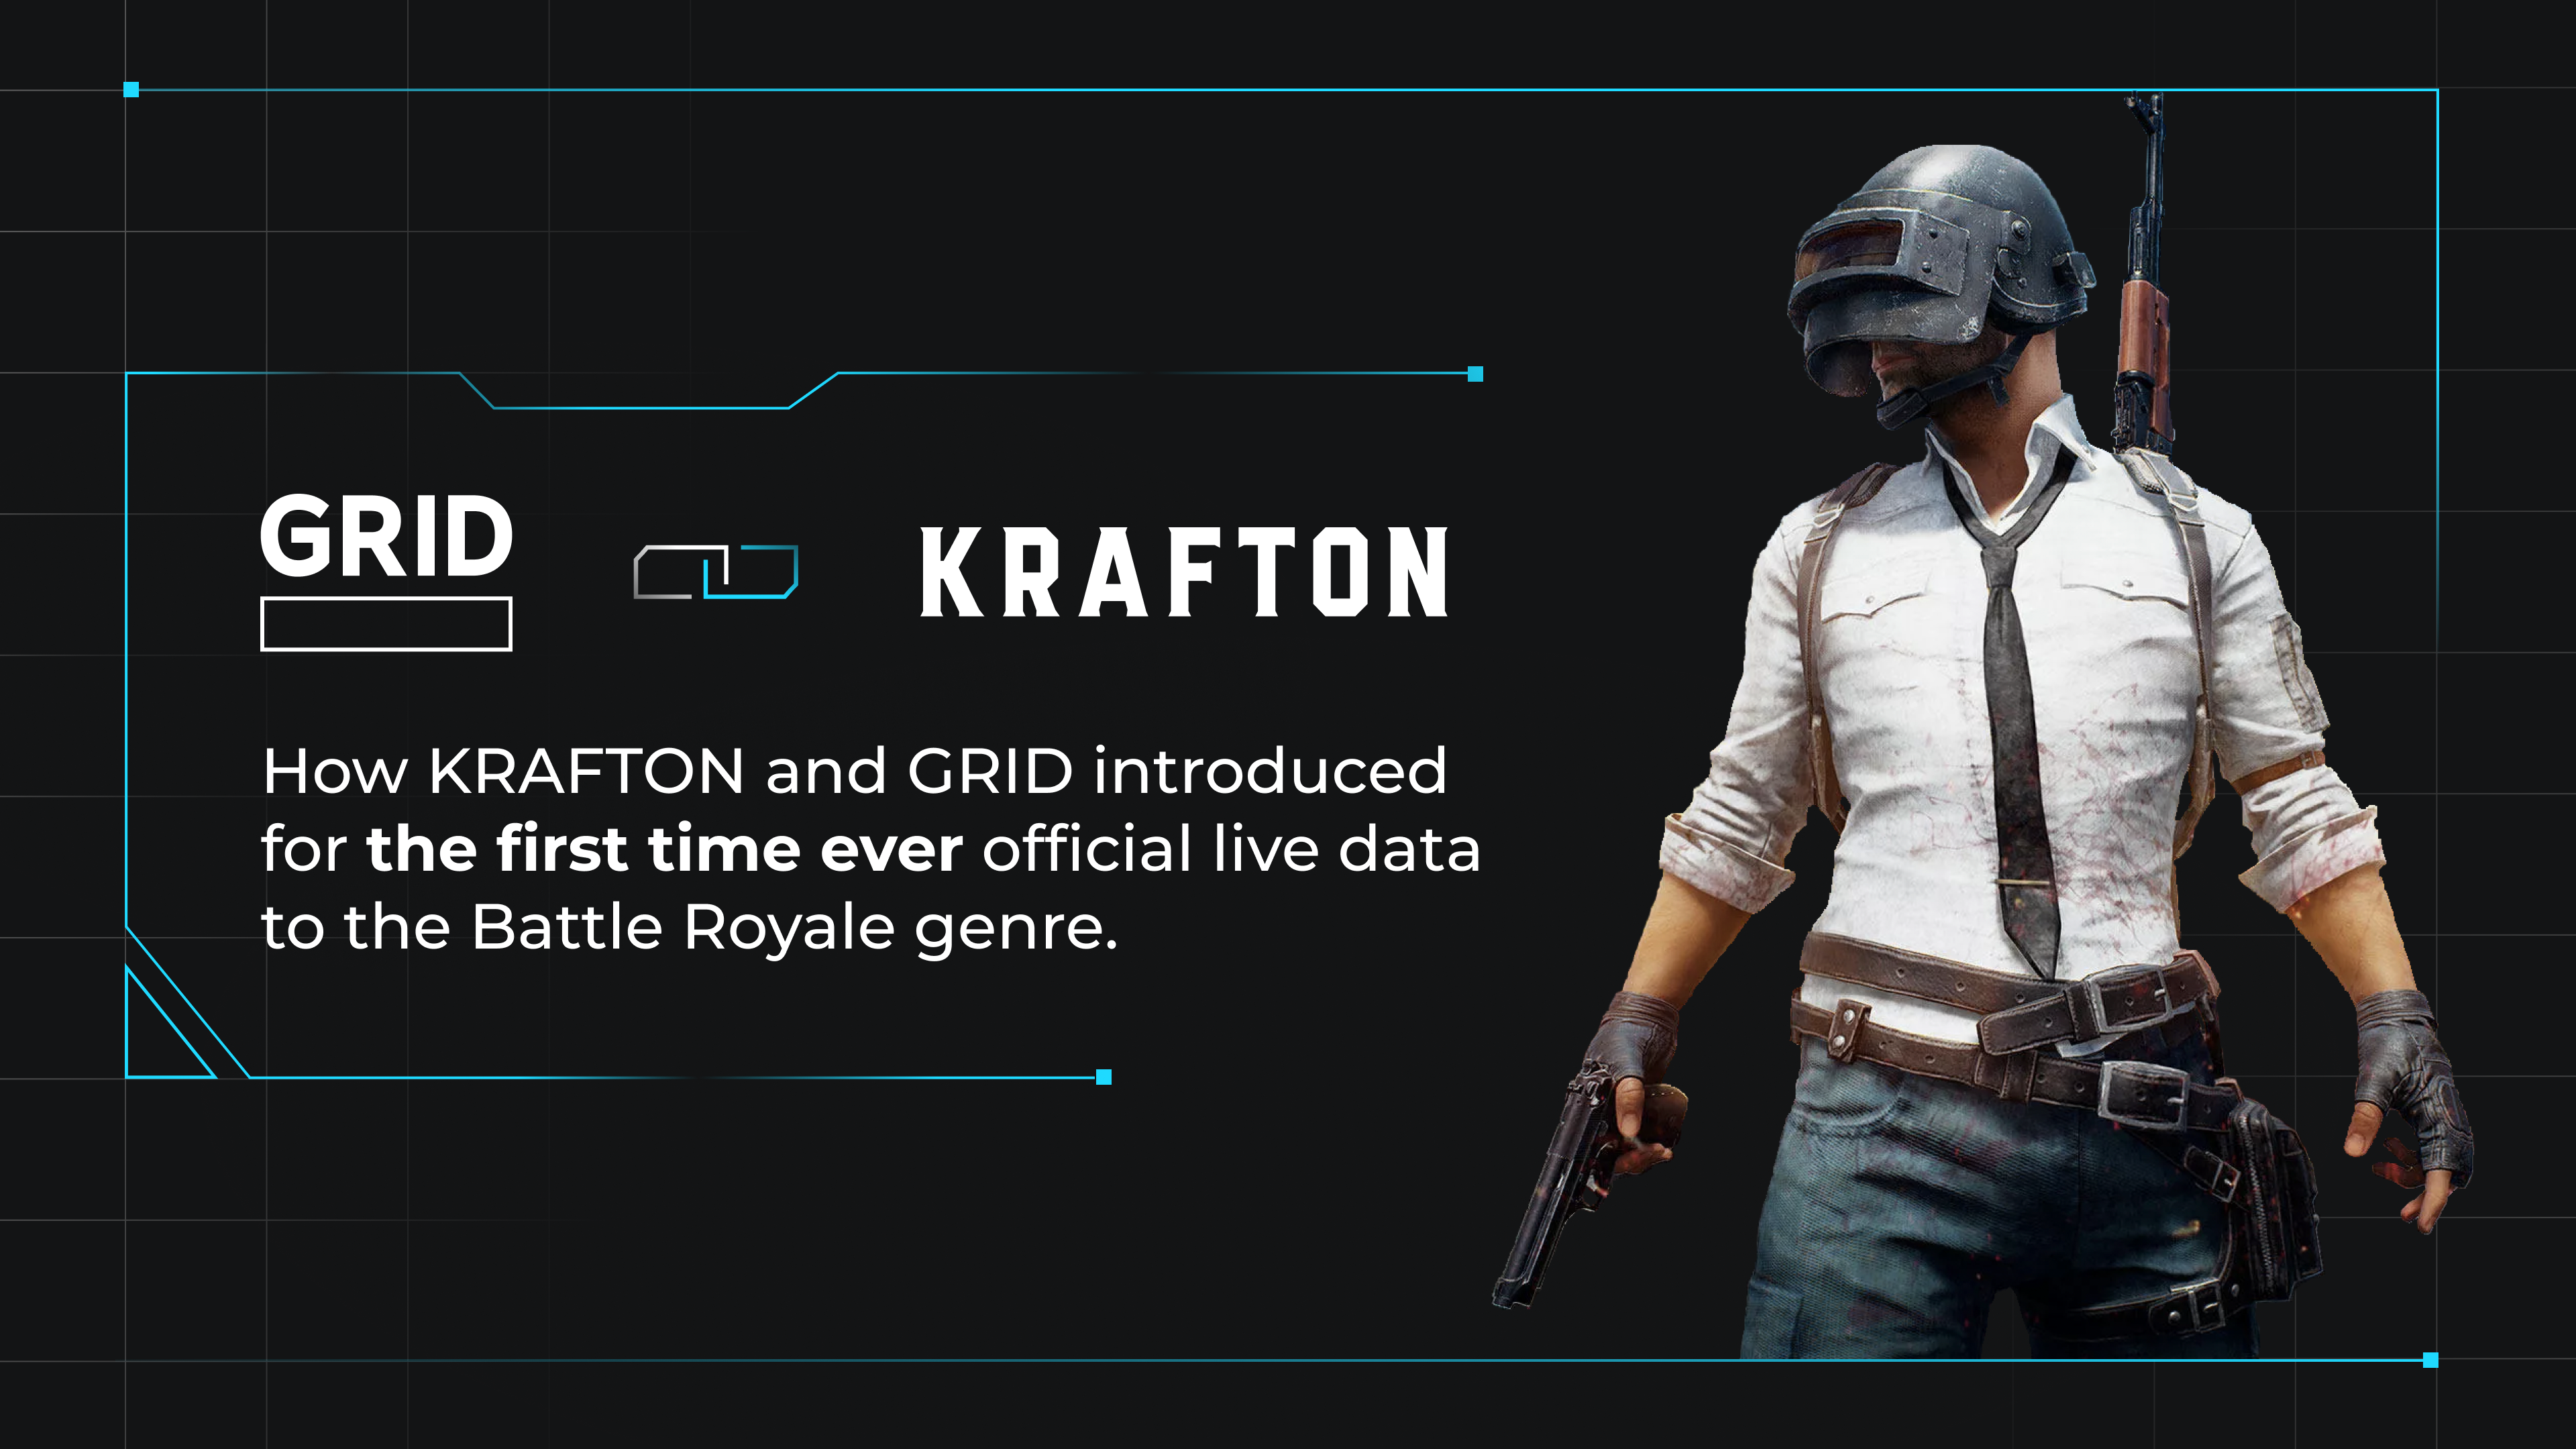 How KRAFTON and GRID introduced official live data to the Battle Royale genre.